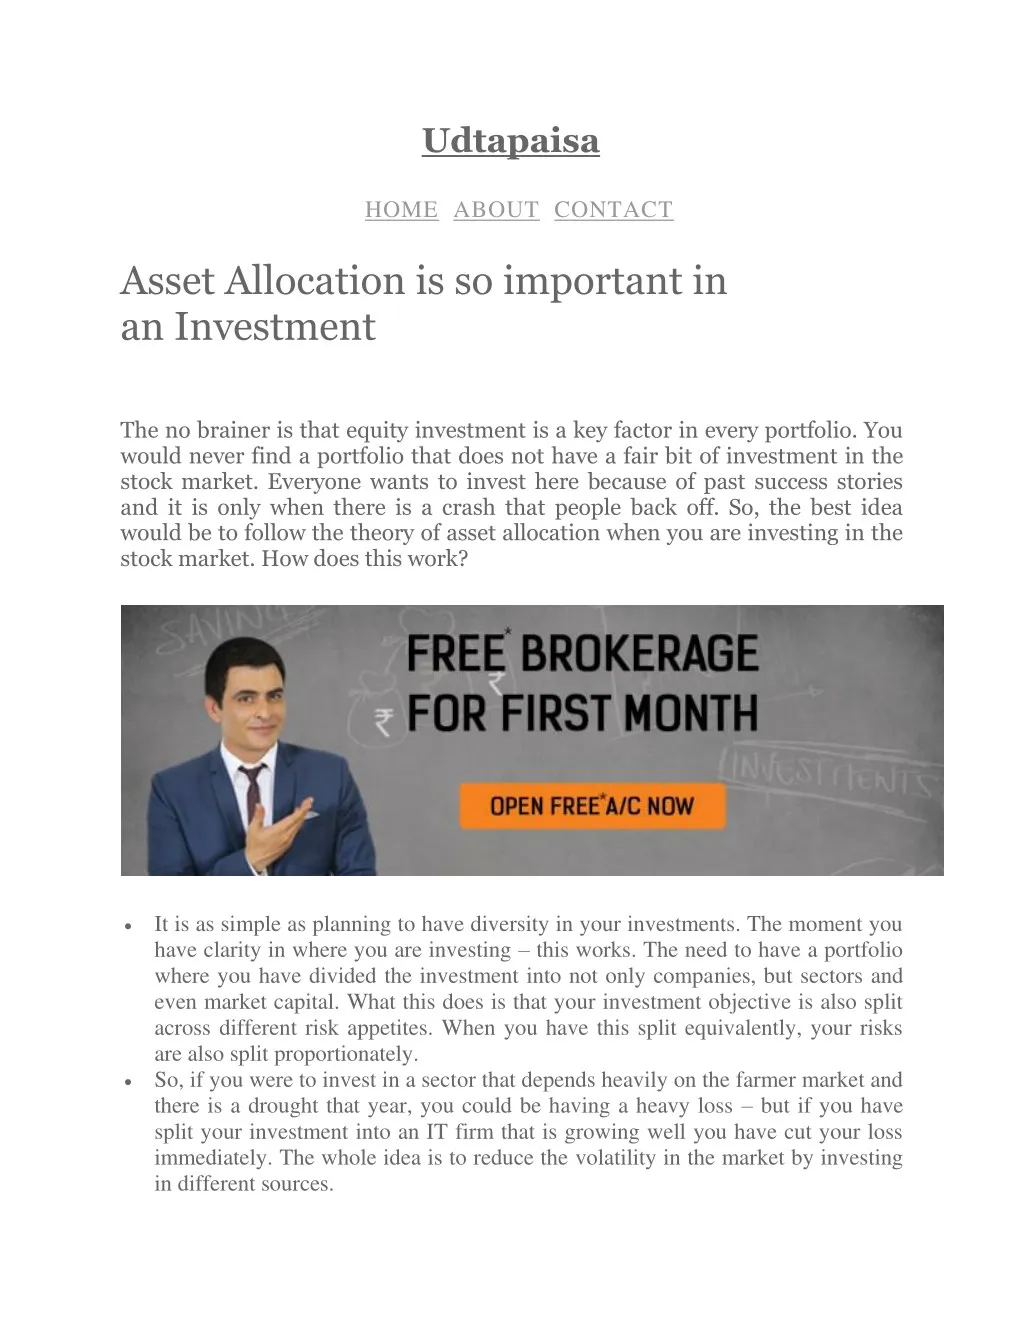 udtapaisa home about contact asset allocation